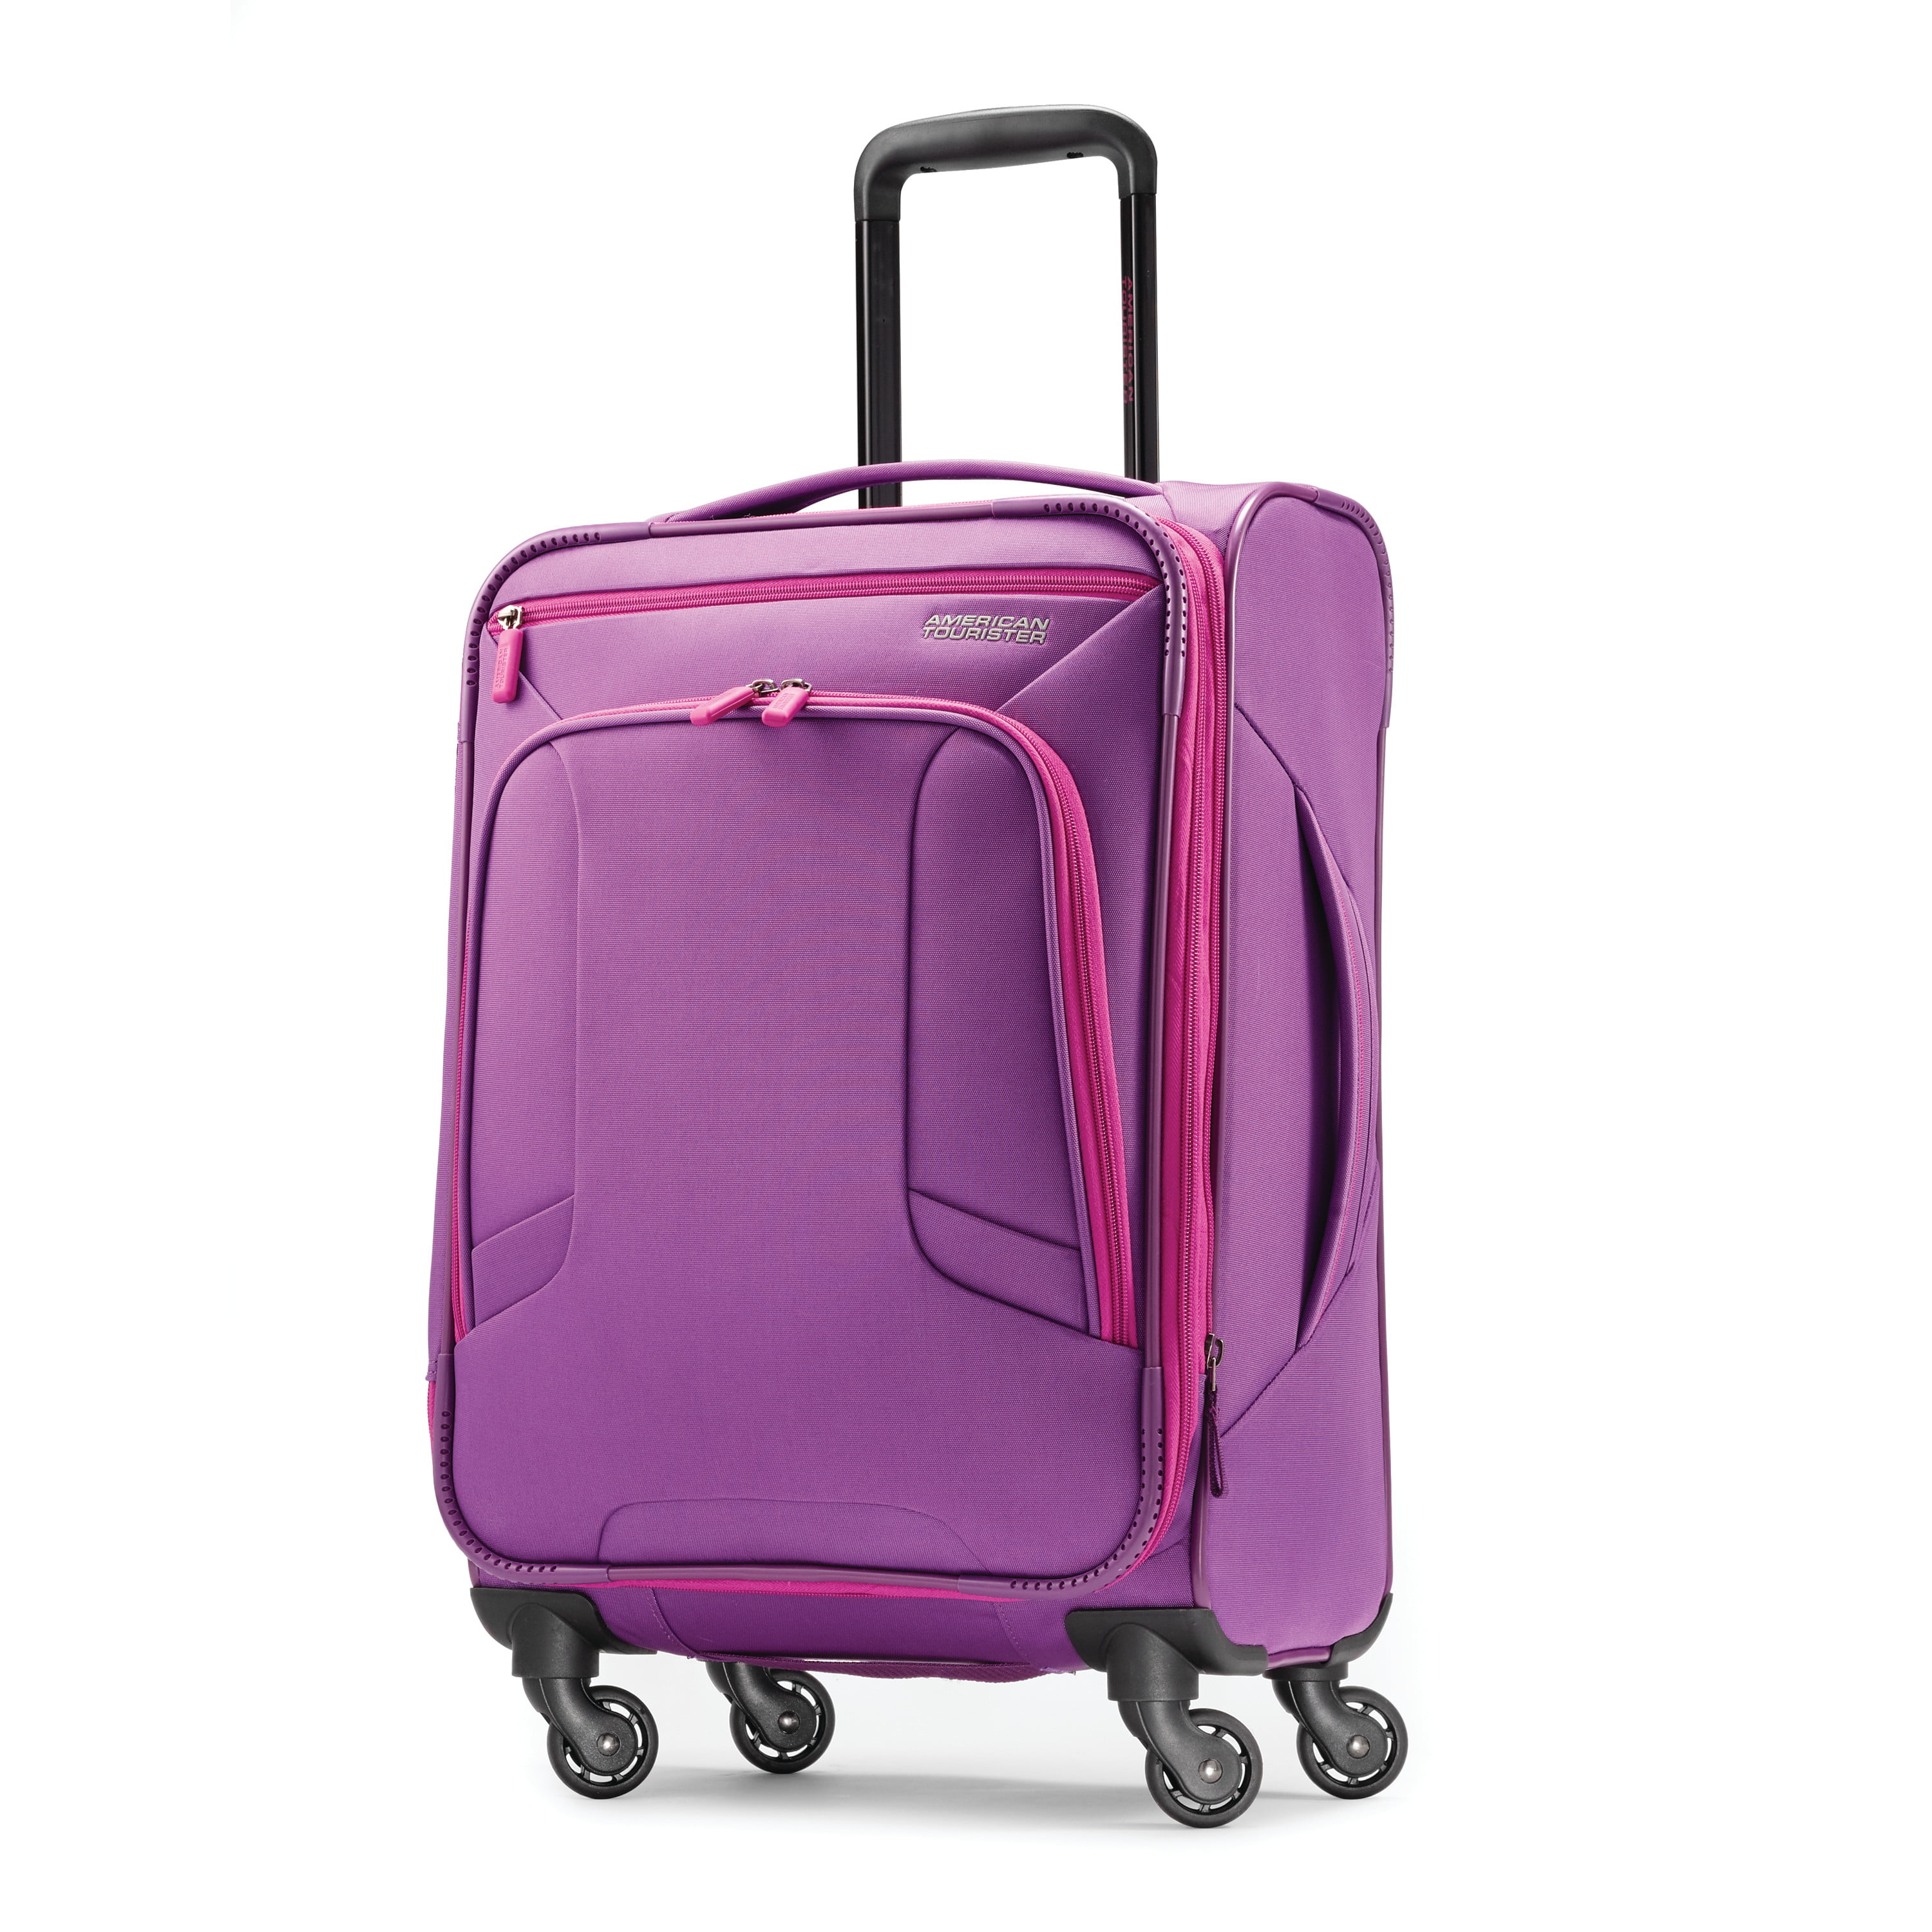 American Tourister 4 Kix 21-inch Softside Spinner, Carry-On